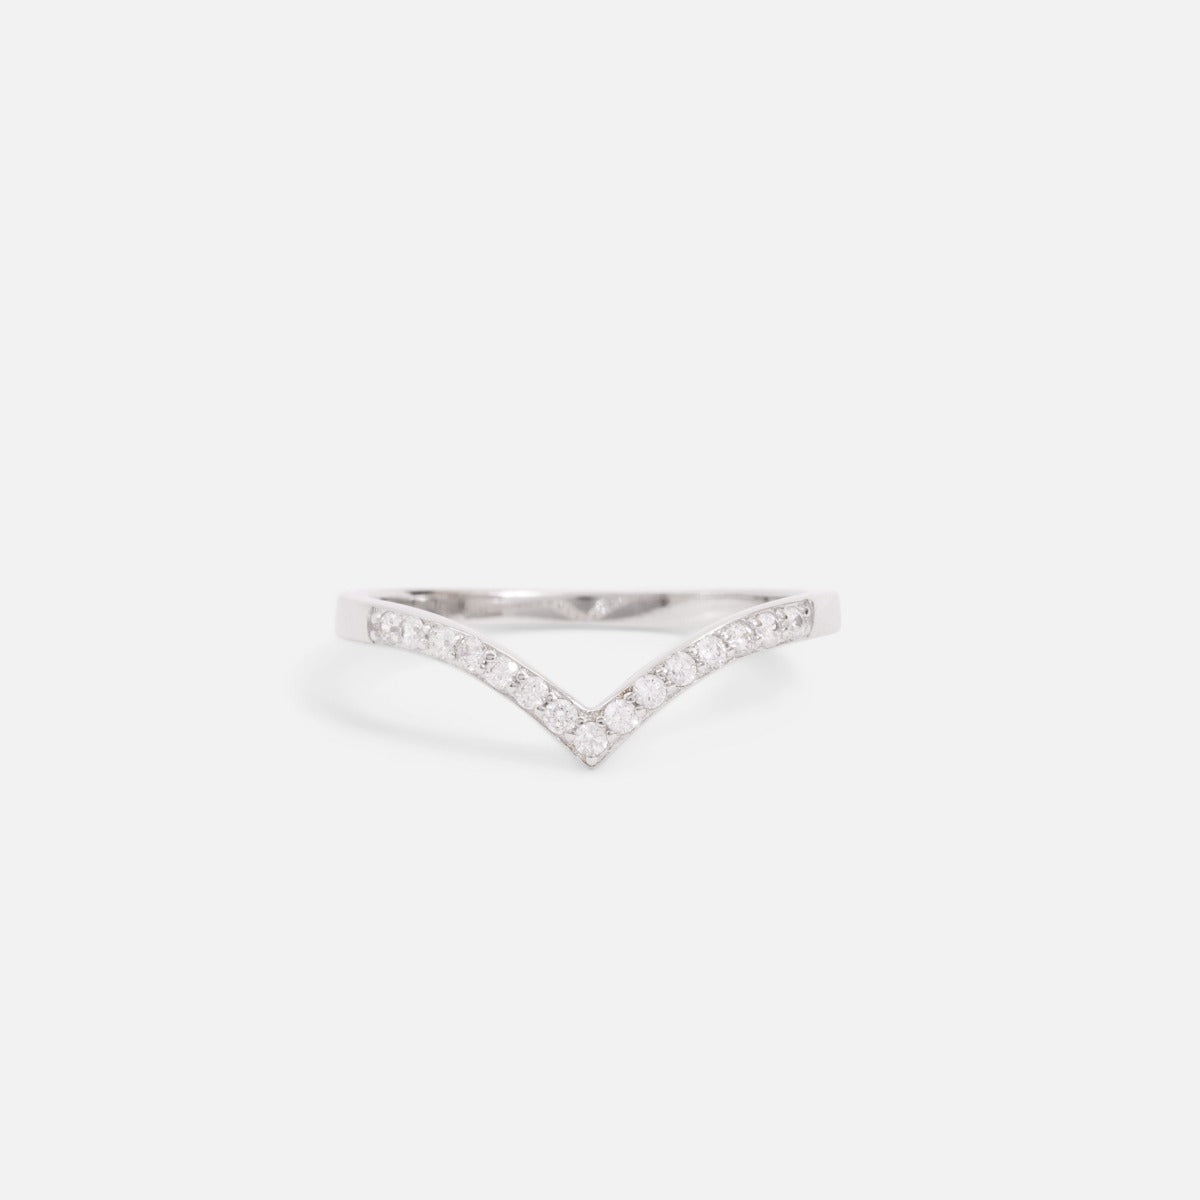 V shapped sterling silver ring with square cubic zirconia stones